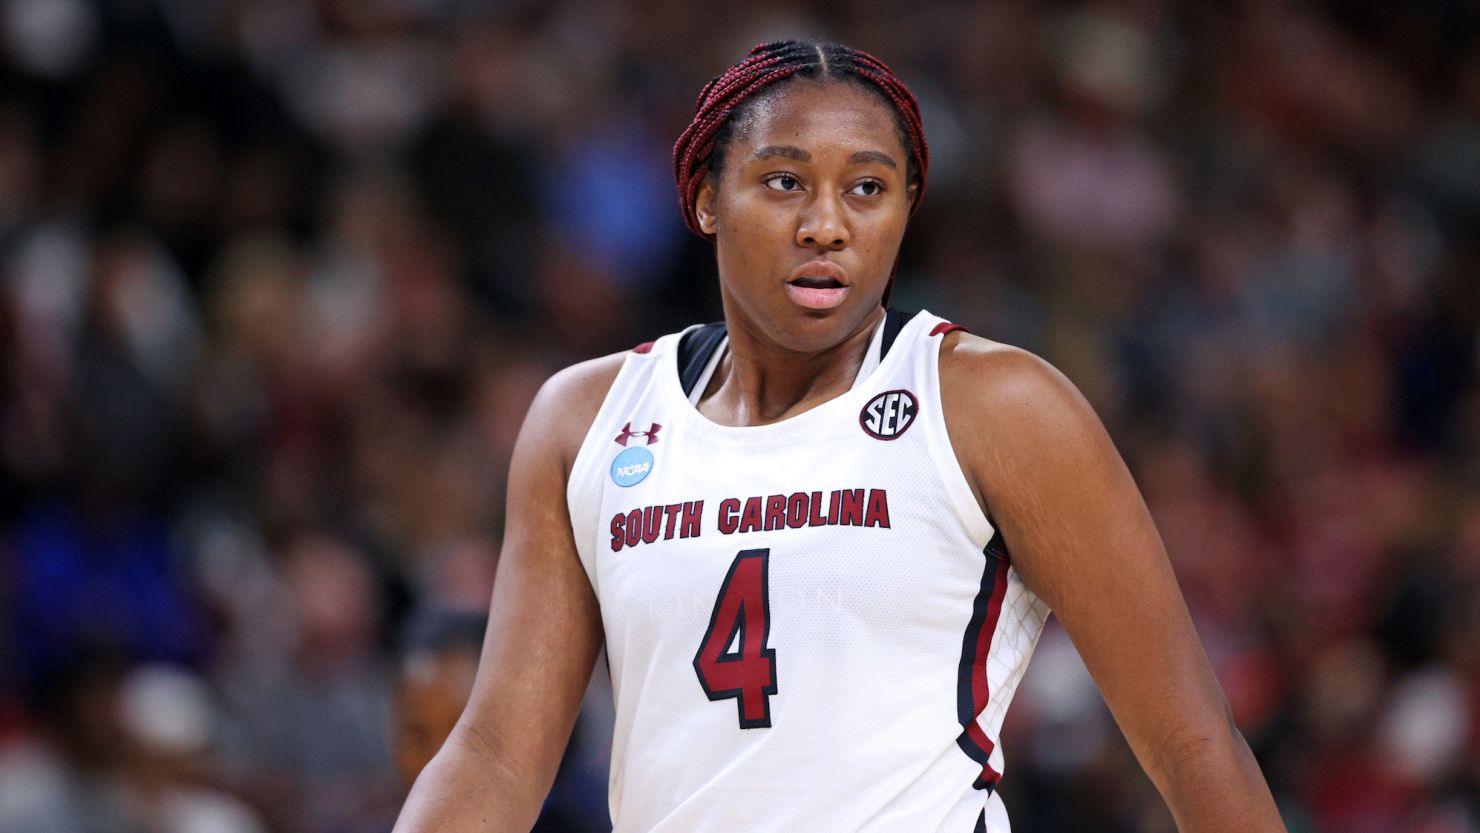 Aliyah Boston is expected to become the 2023 WNBA Draft first pick.